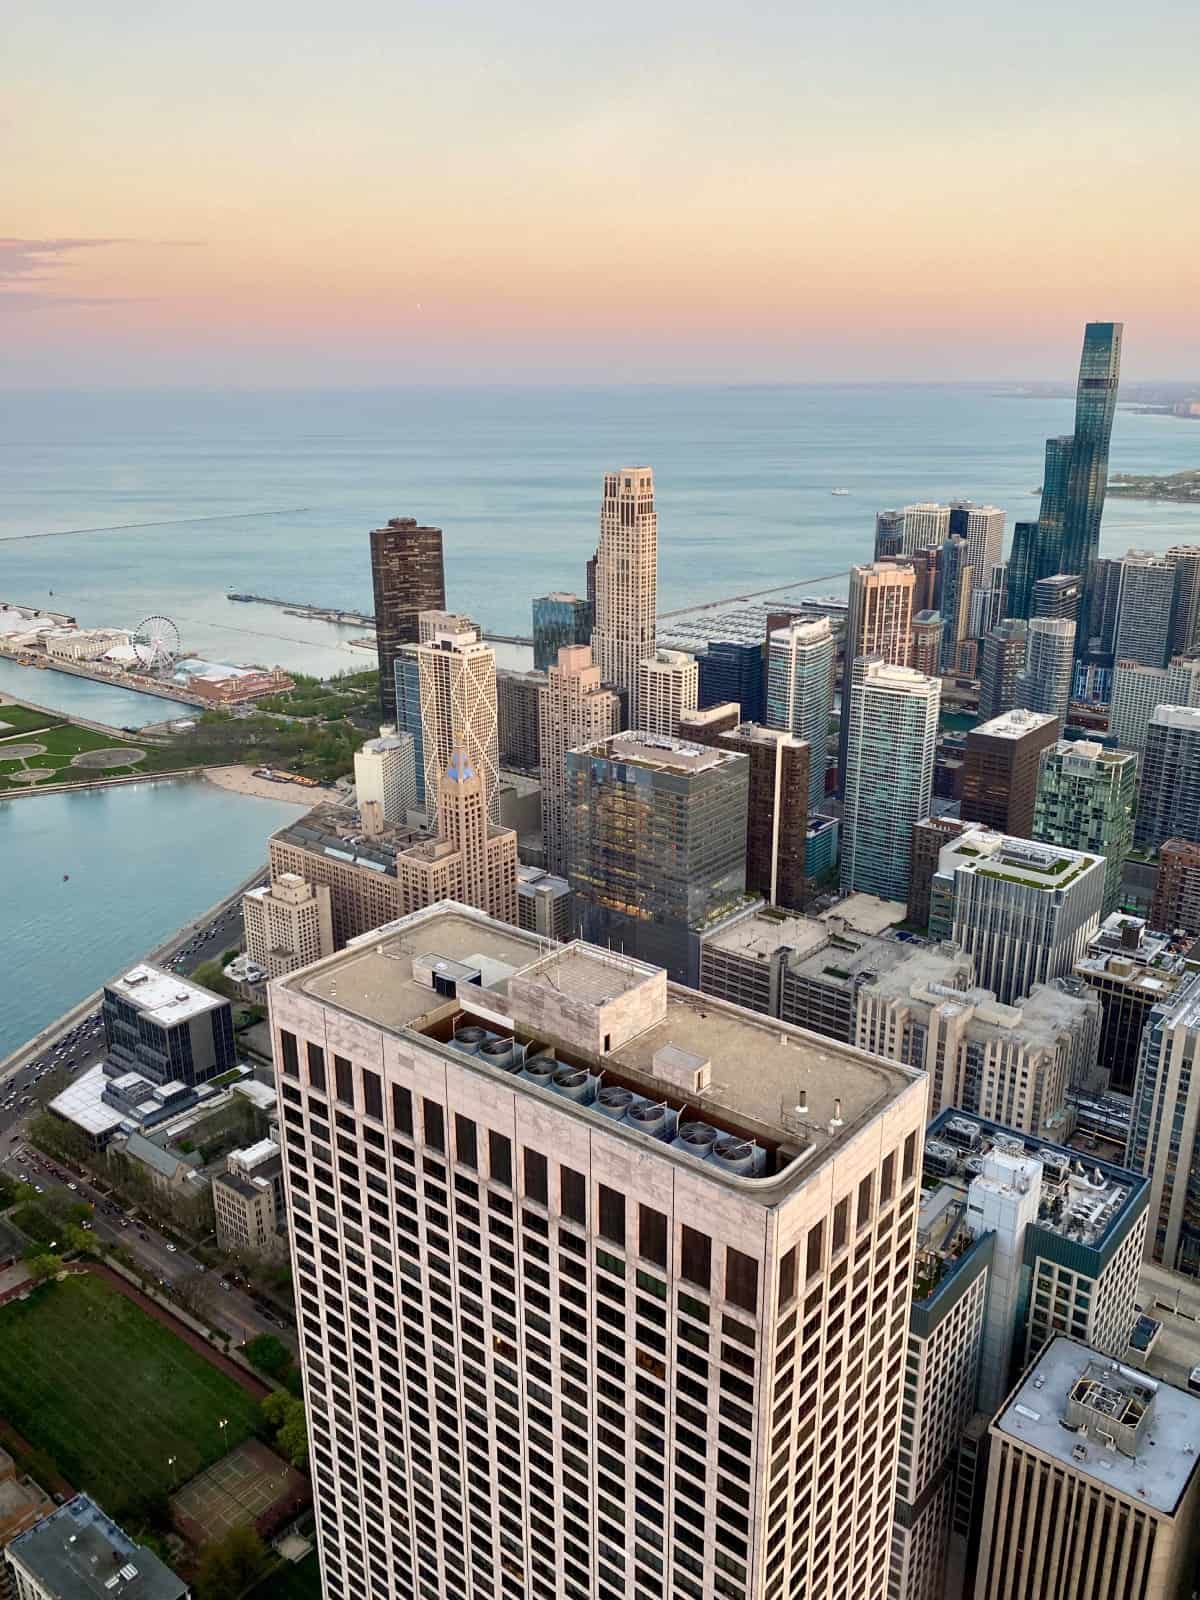 Chicago photography tips & other city photography tips - get up high for sunset